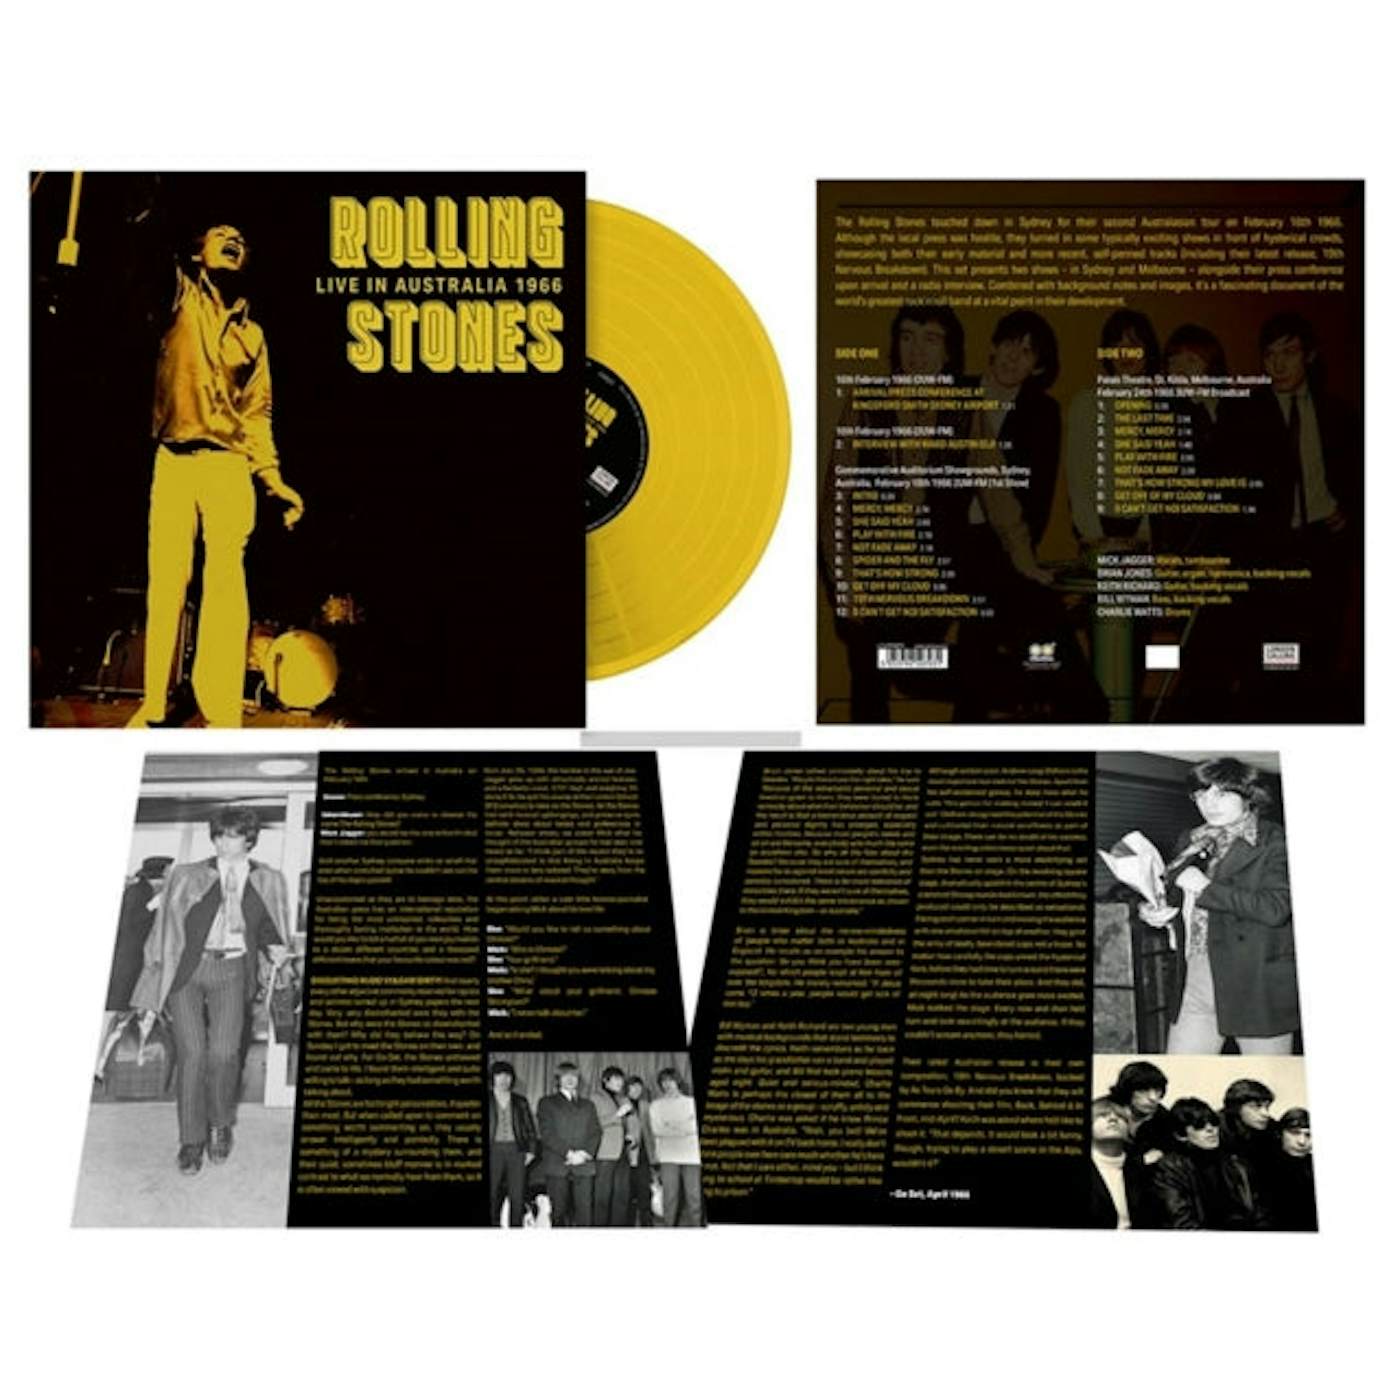 The Rolling Stones LP - Live In Australia 1966 (Yellow Vinyl Limited)